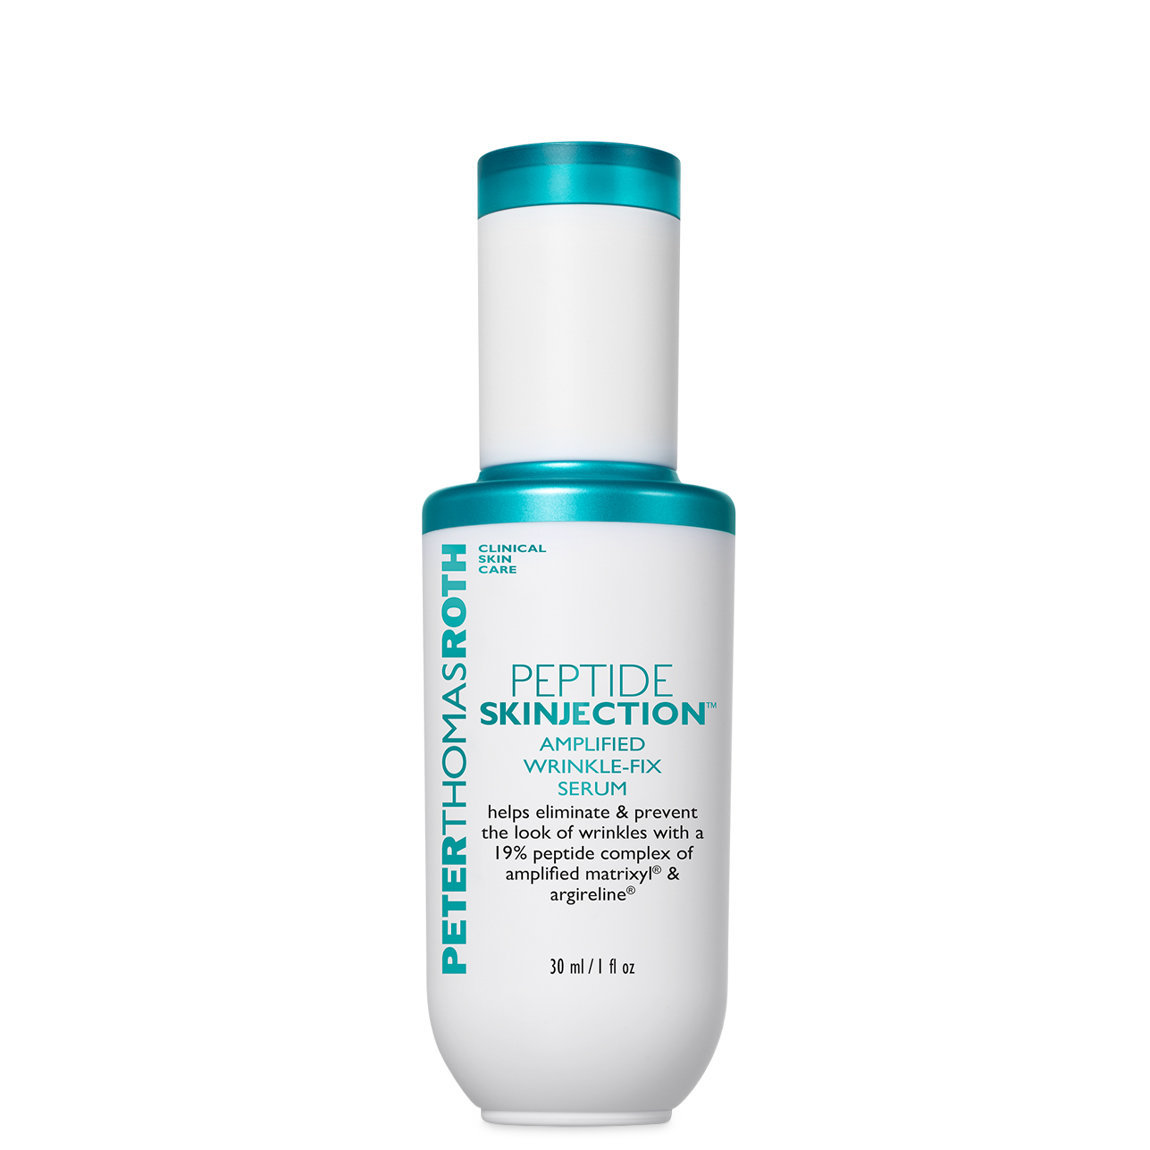 Peter Thomas Roth Peptide Skinjection Amplified Wrinkle-Fix